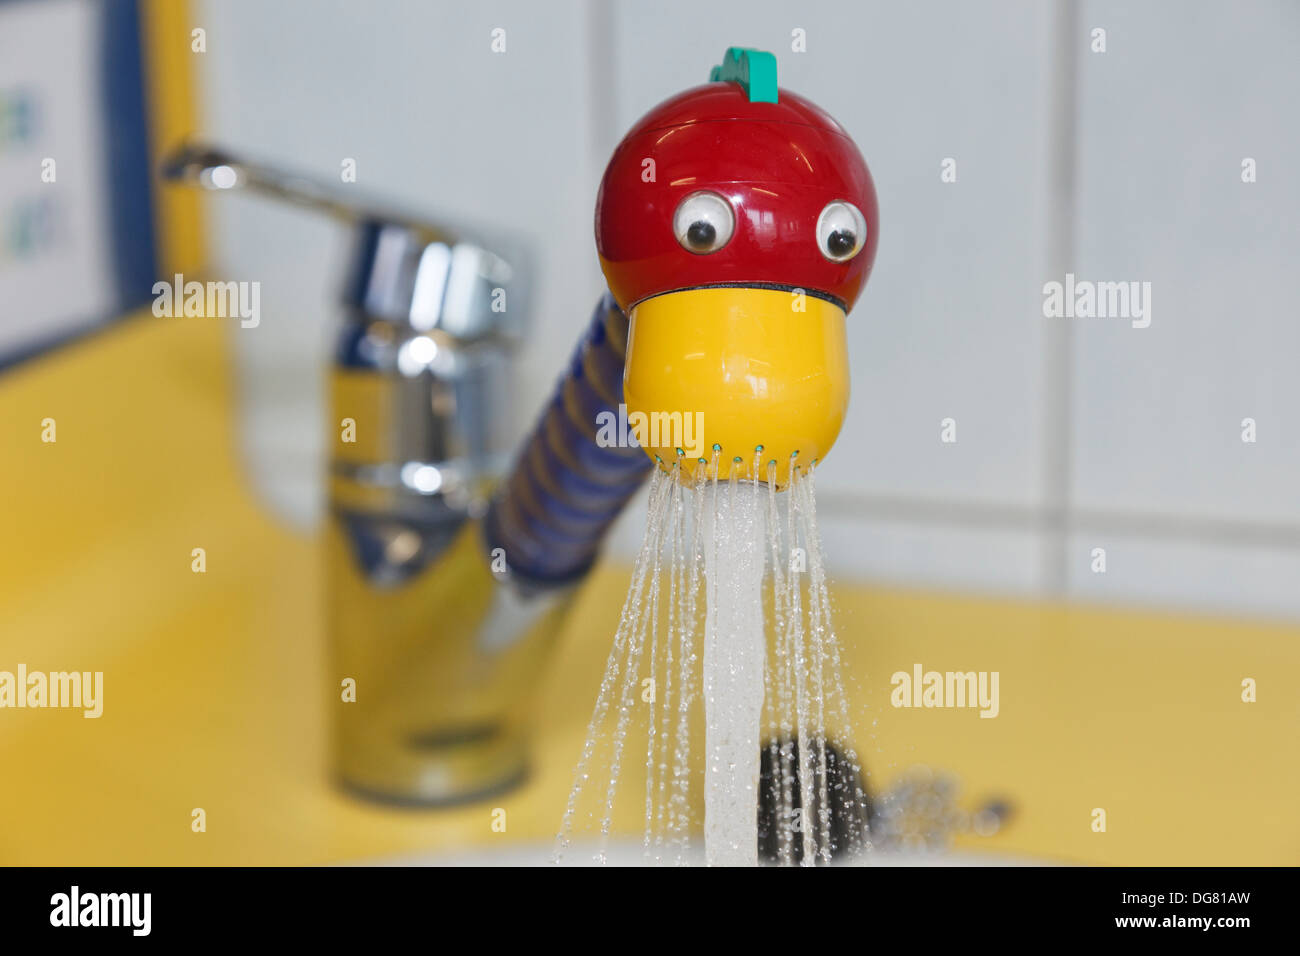 Tap in a red and yellow novelty fun duck's head design switched on spraying water into a wash basin in a children's washroom Stock Photo